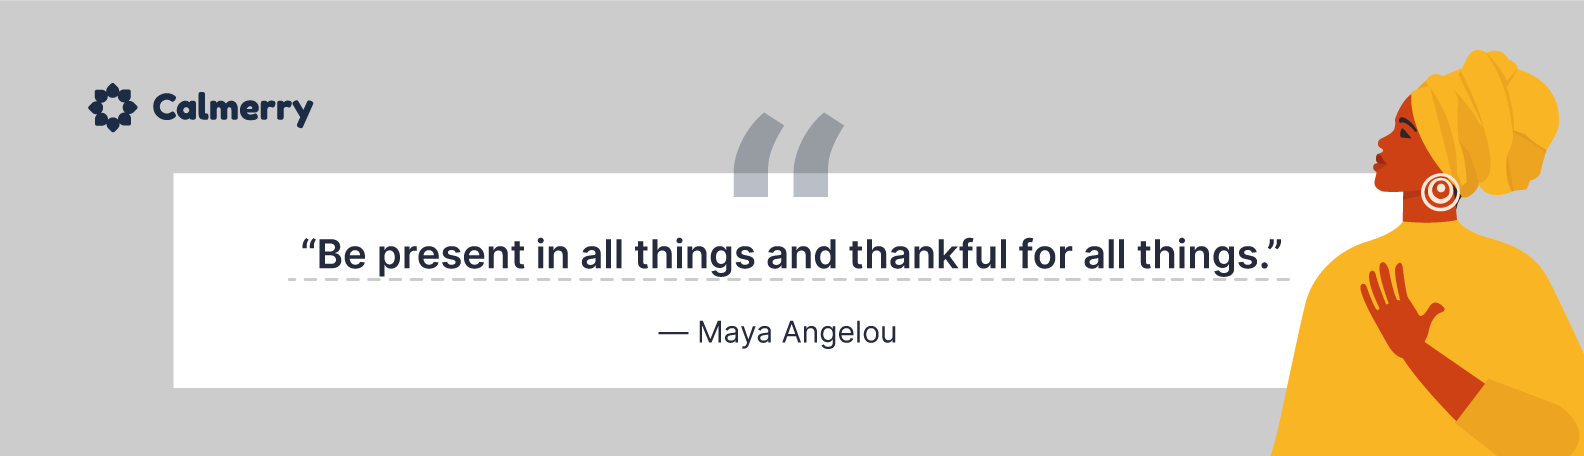 Be present in all things and thankful for all things